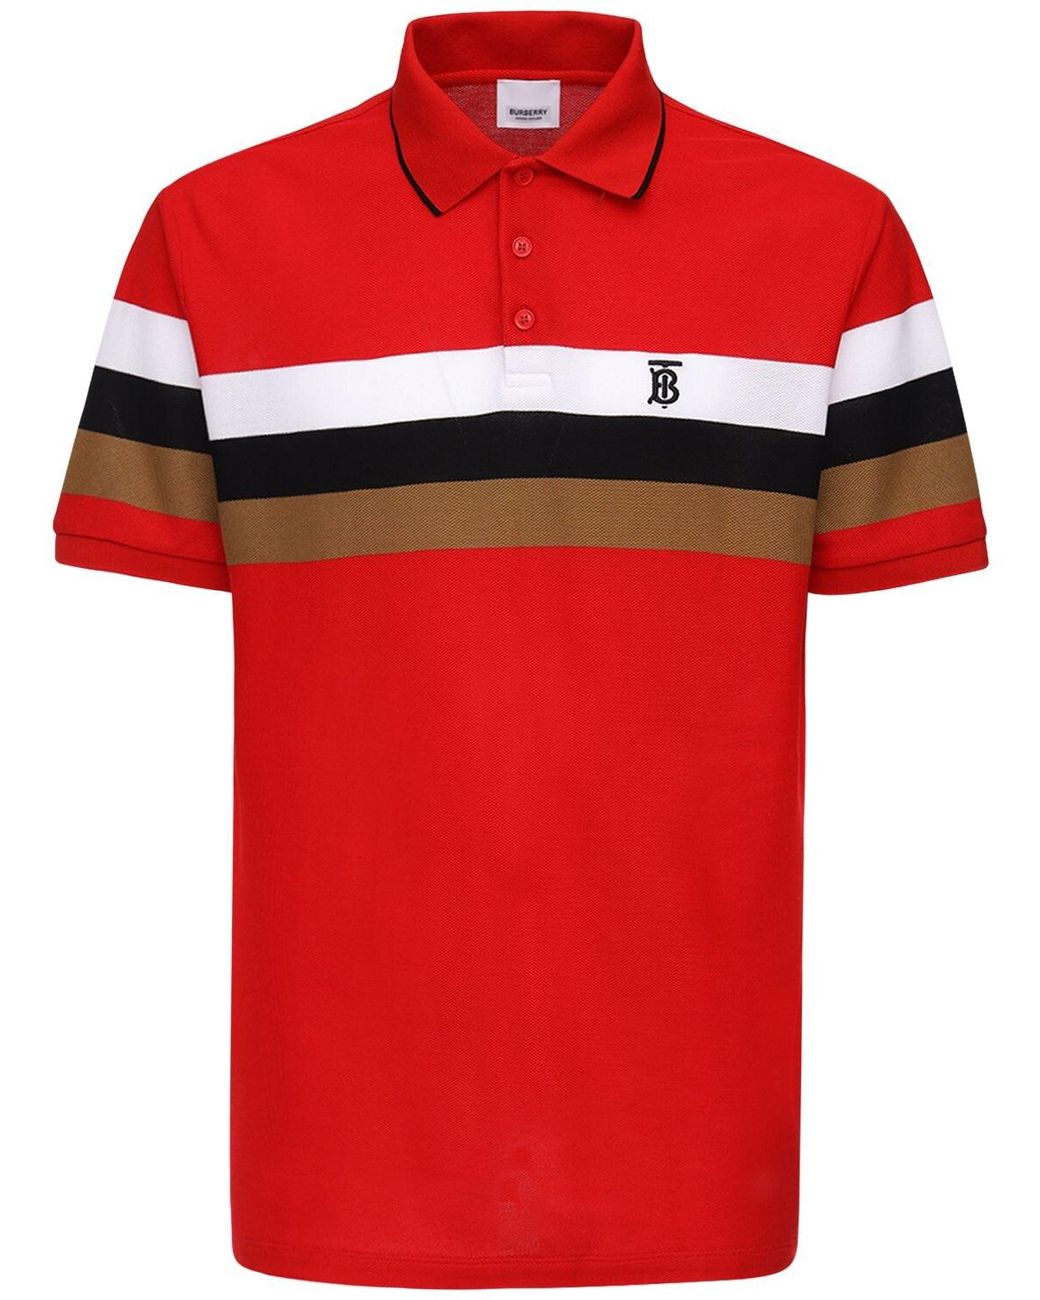 Burberry Heritage Striped Cotton Piqué Polo Shirt in Bright Red (Red ...